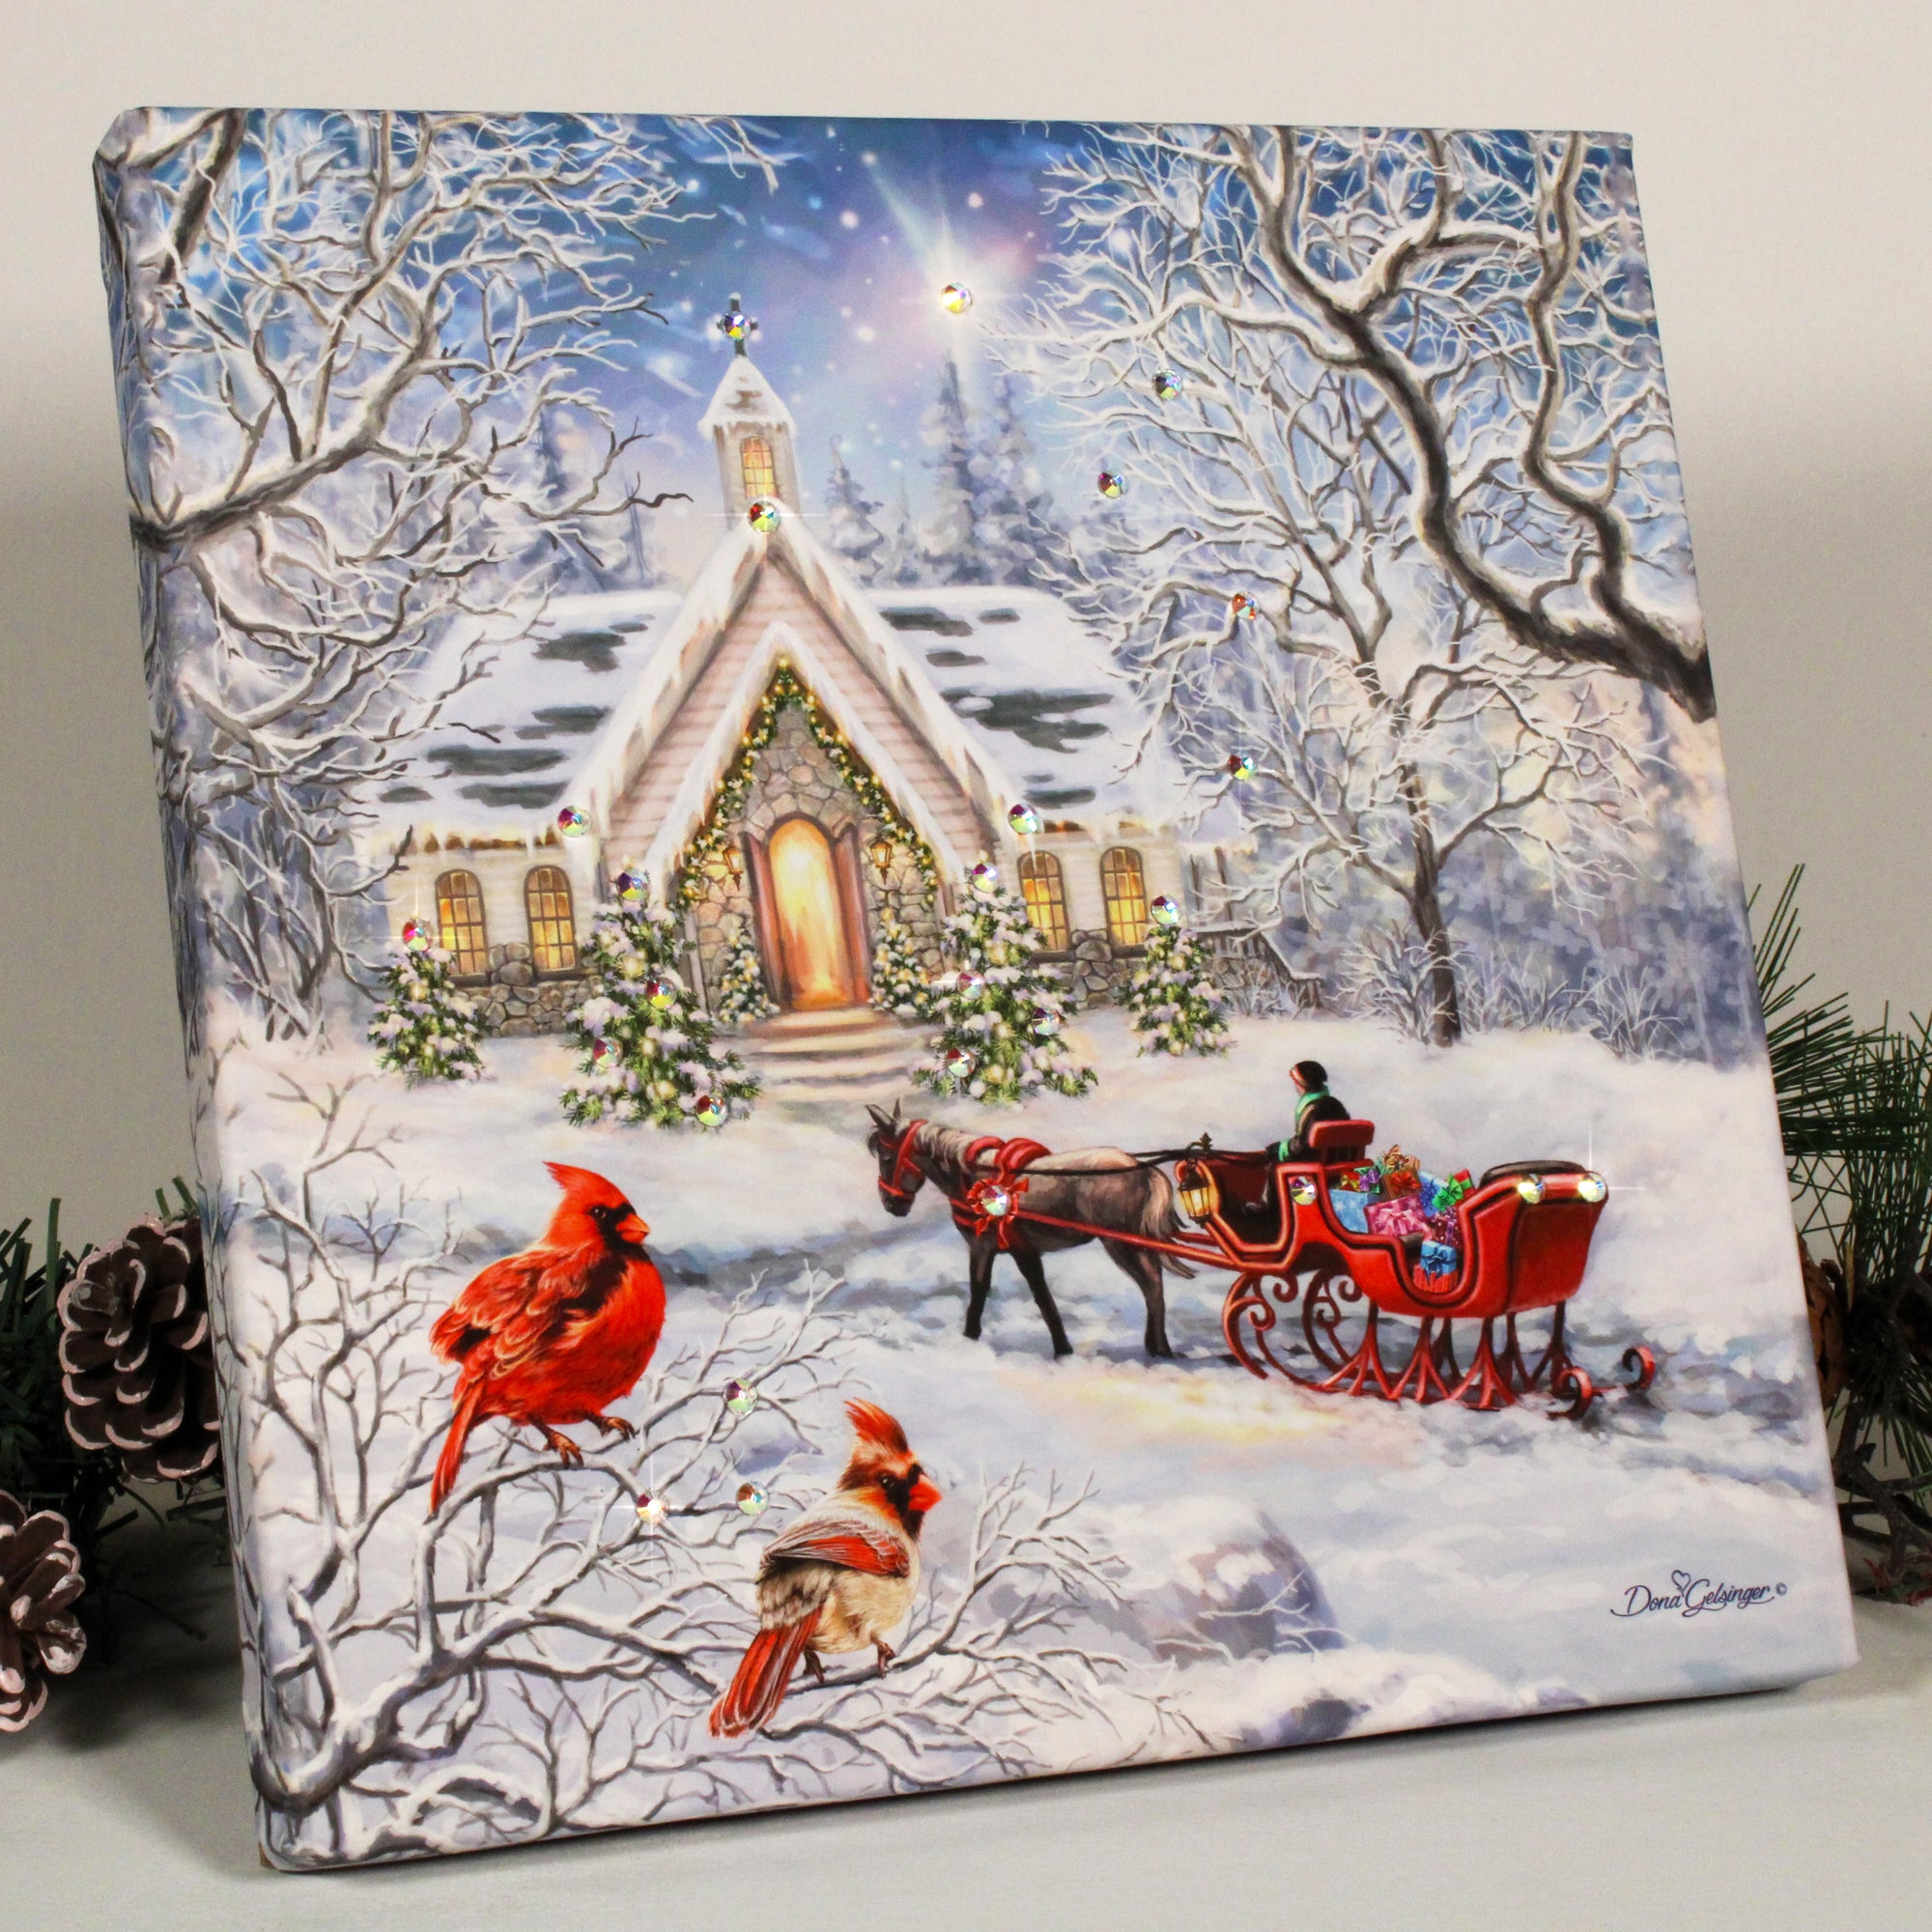 Experience the magic of the season with A Christmas Journey Pizazz Print with Dazzling Crystals! This enchanting piece captures the essence of the holiday with its stunning depiction of a red horse drawn carriage in front of a charming chapel.